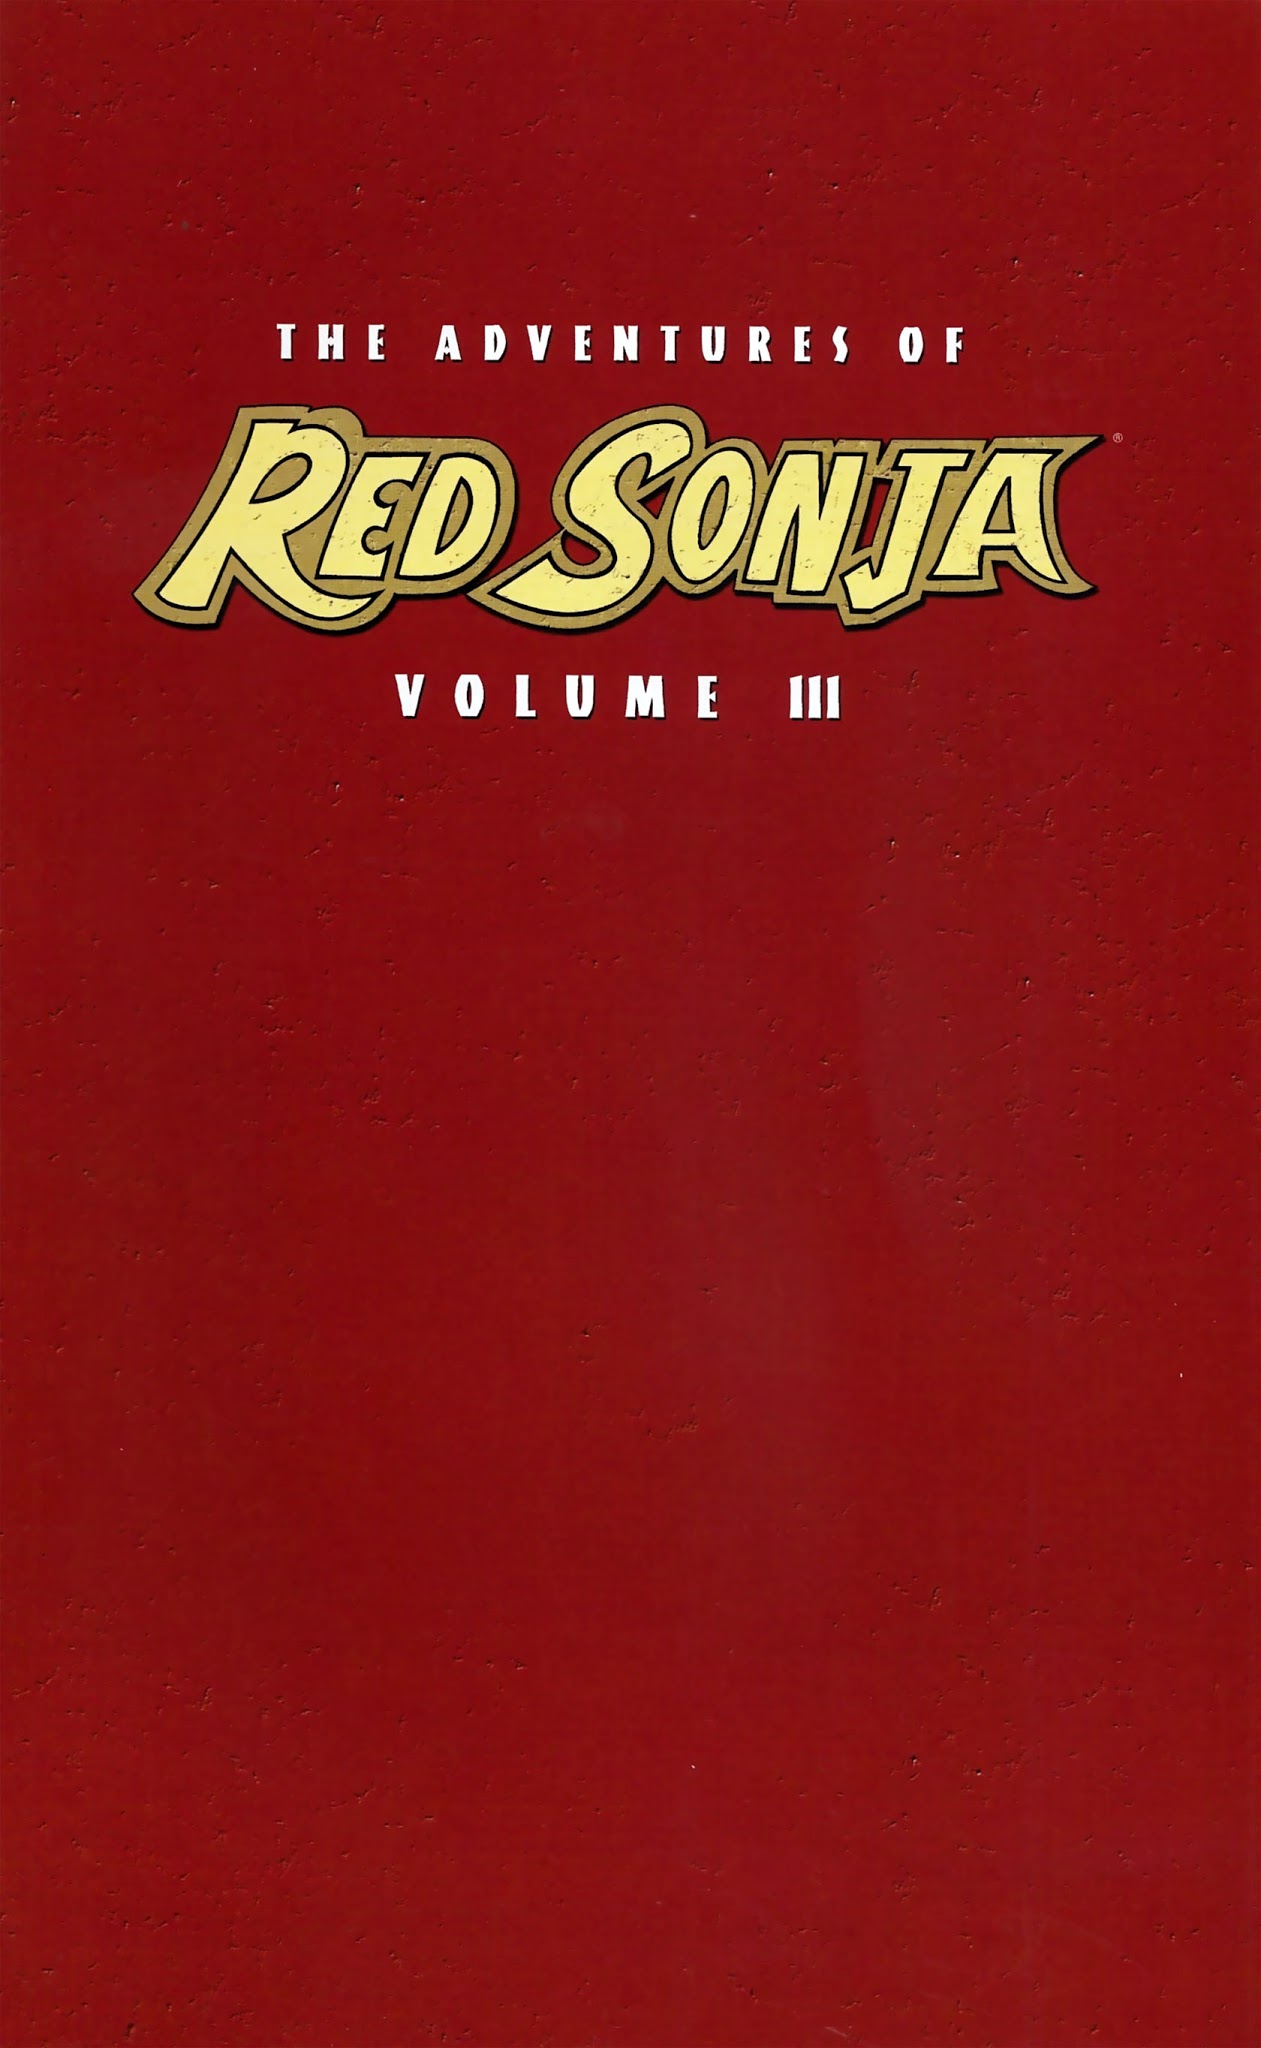 Read online The Adventures of Red Sonja comic -  Issue # TPB 3 - 3